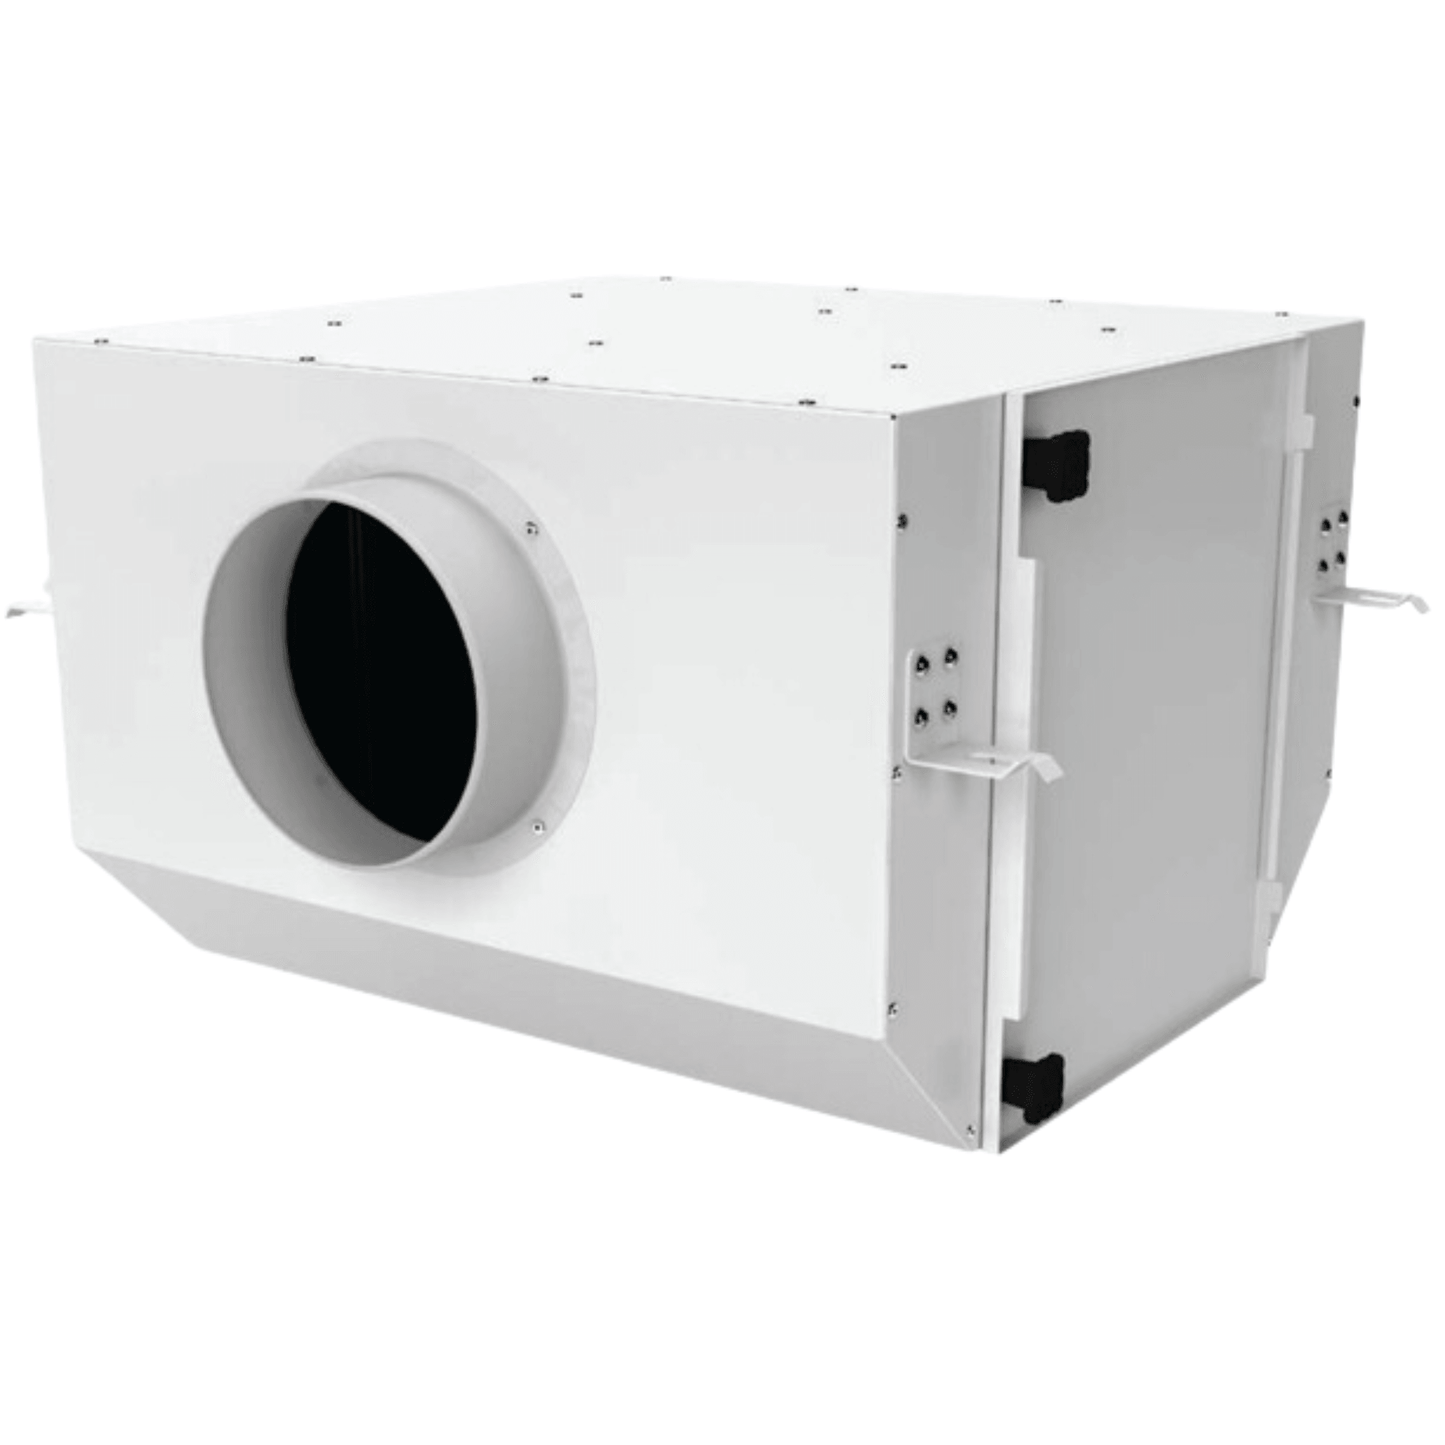 Vents FB K2 Series Filter Box with HEPA Filtration